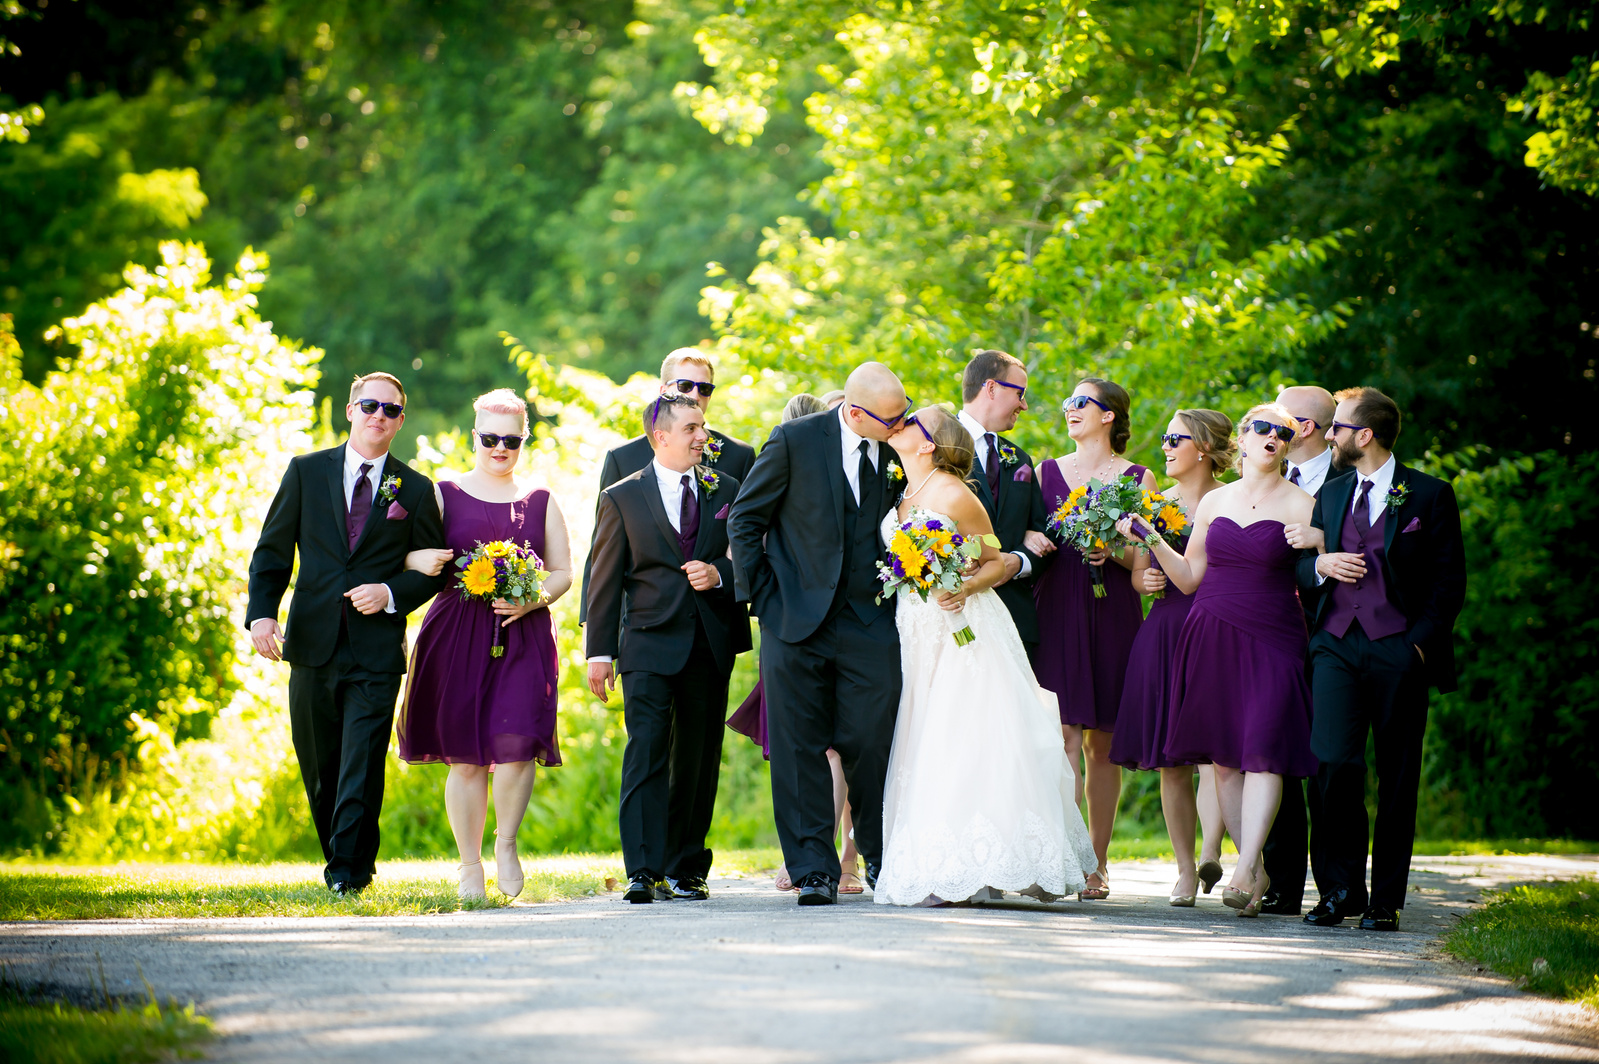 Couple with bridal party walking in the park
